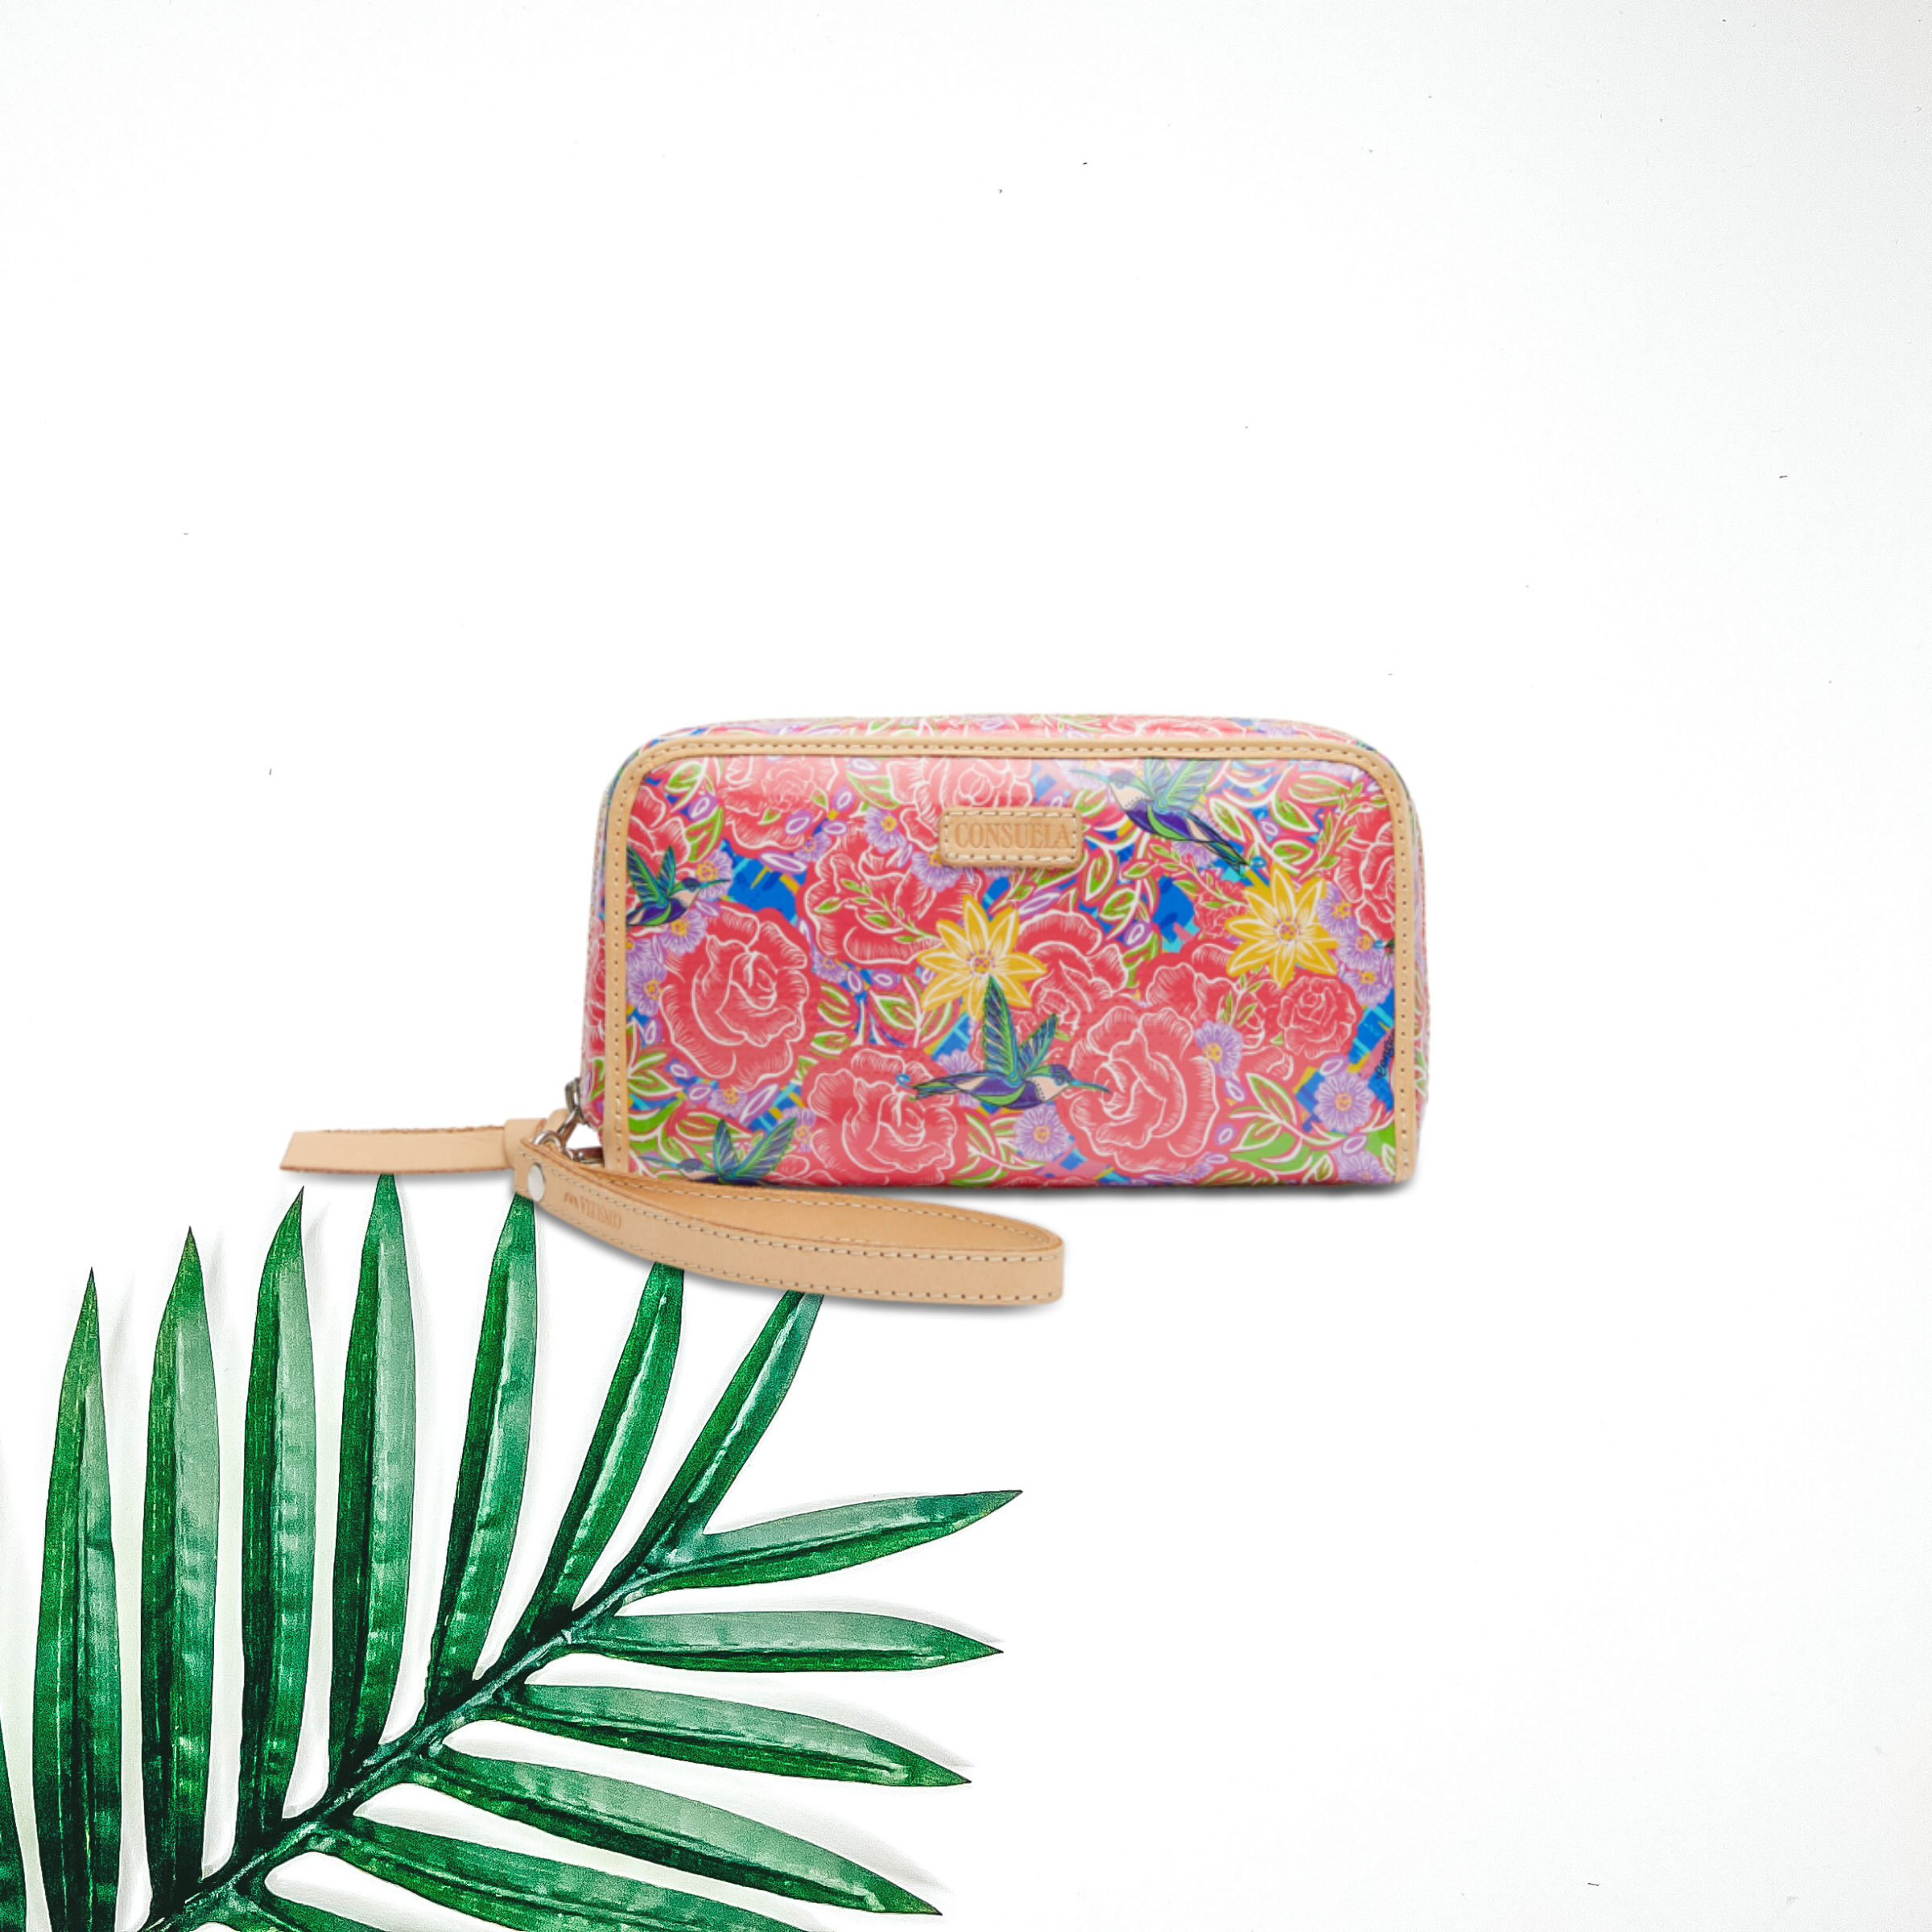 Centered in the picture is a multi colored floral wristlet wallet. A palm leaf is on the bottom right corner. Background is white. 